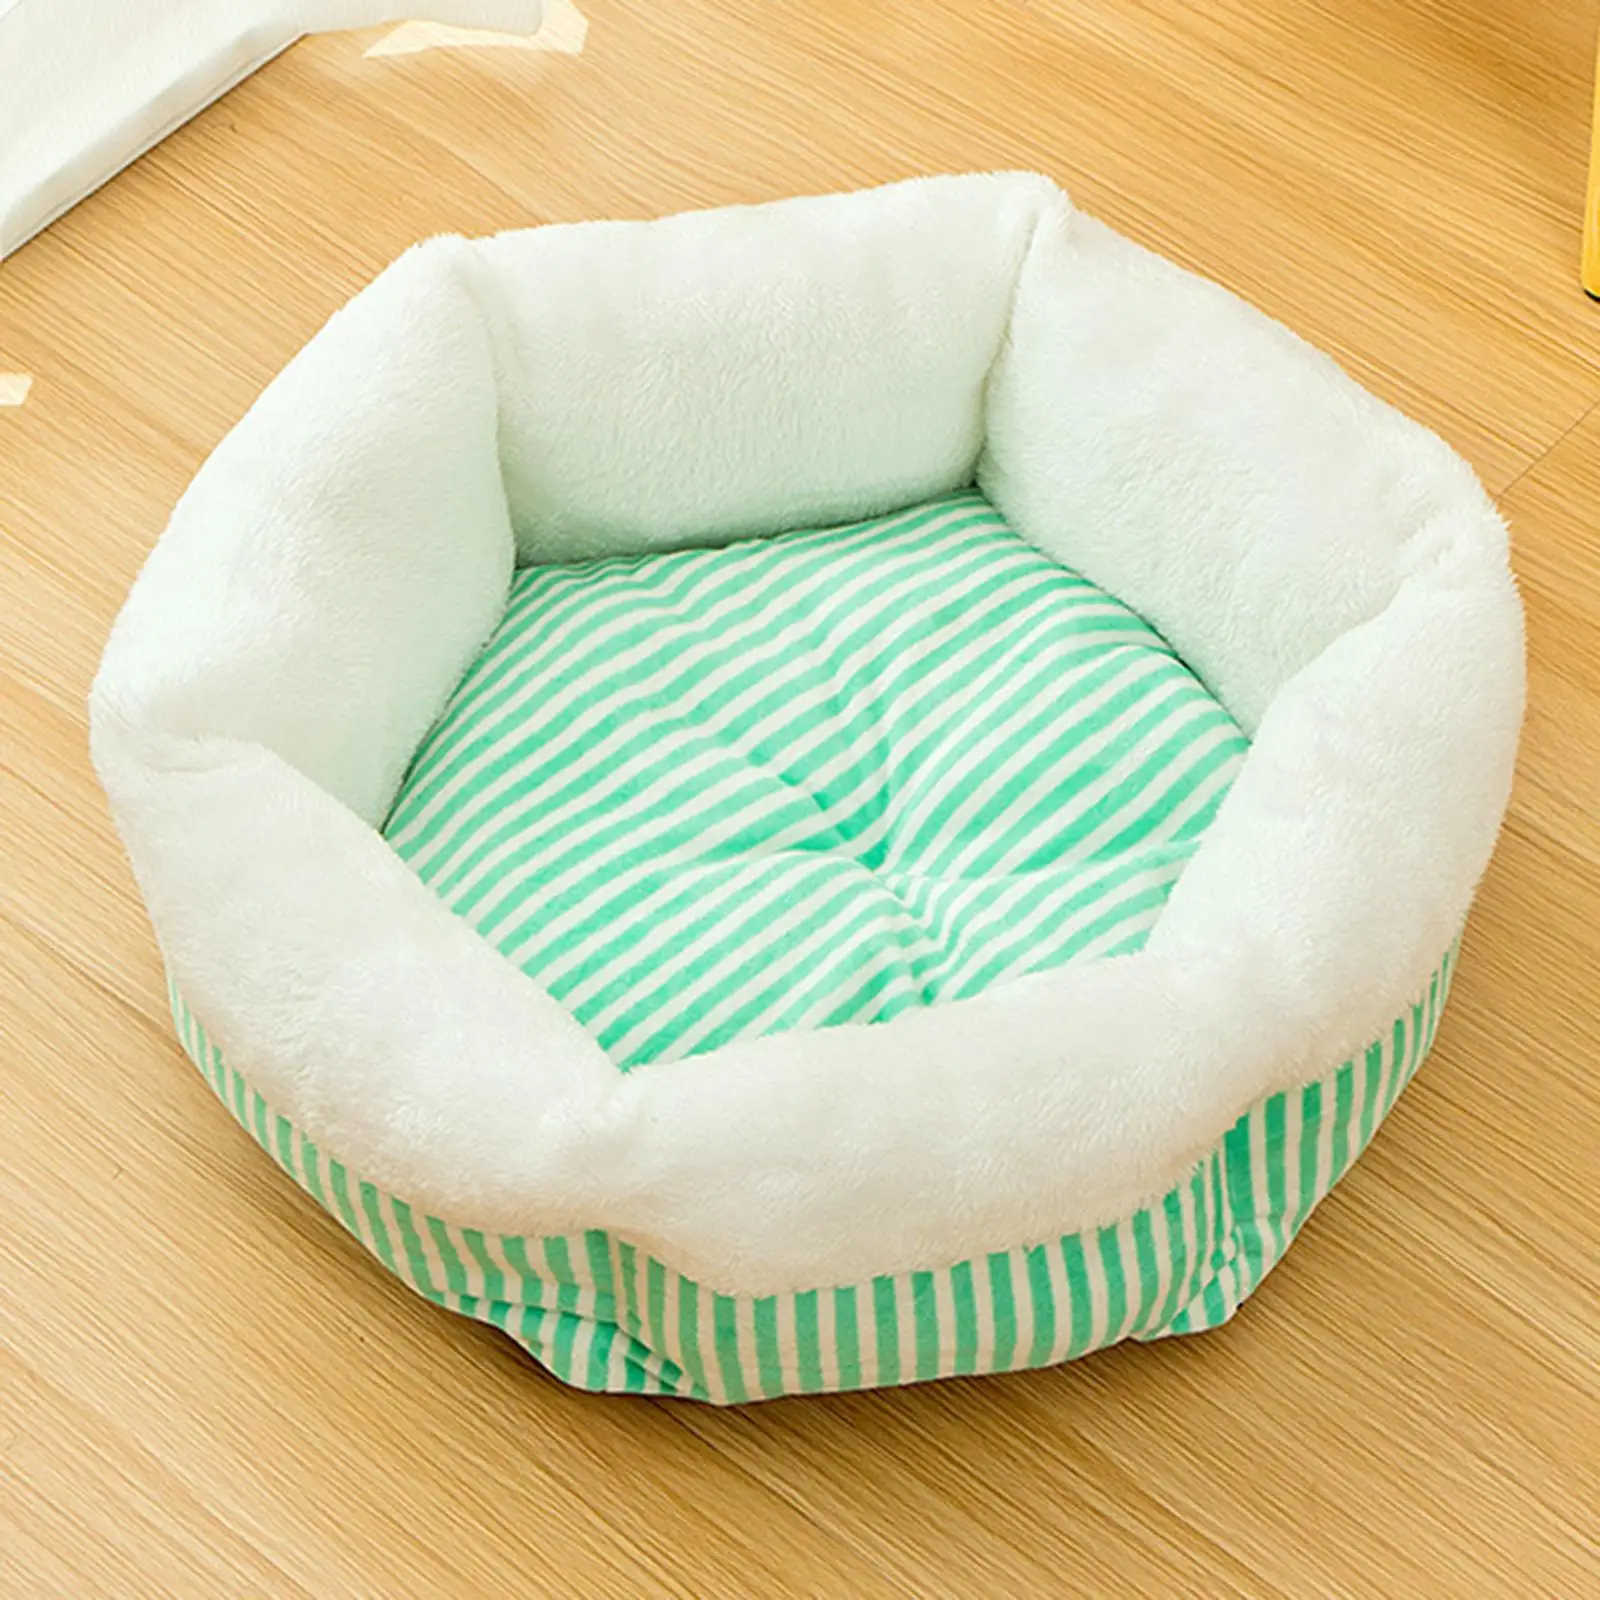 Comfy Cat Dog Cushion Bed Soft Warming Comfortable Anti Slip Bottom Mat for Cats Kittens